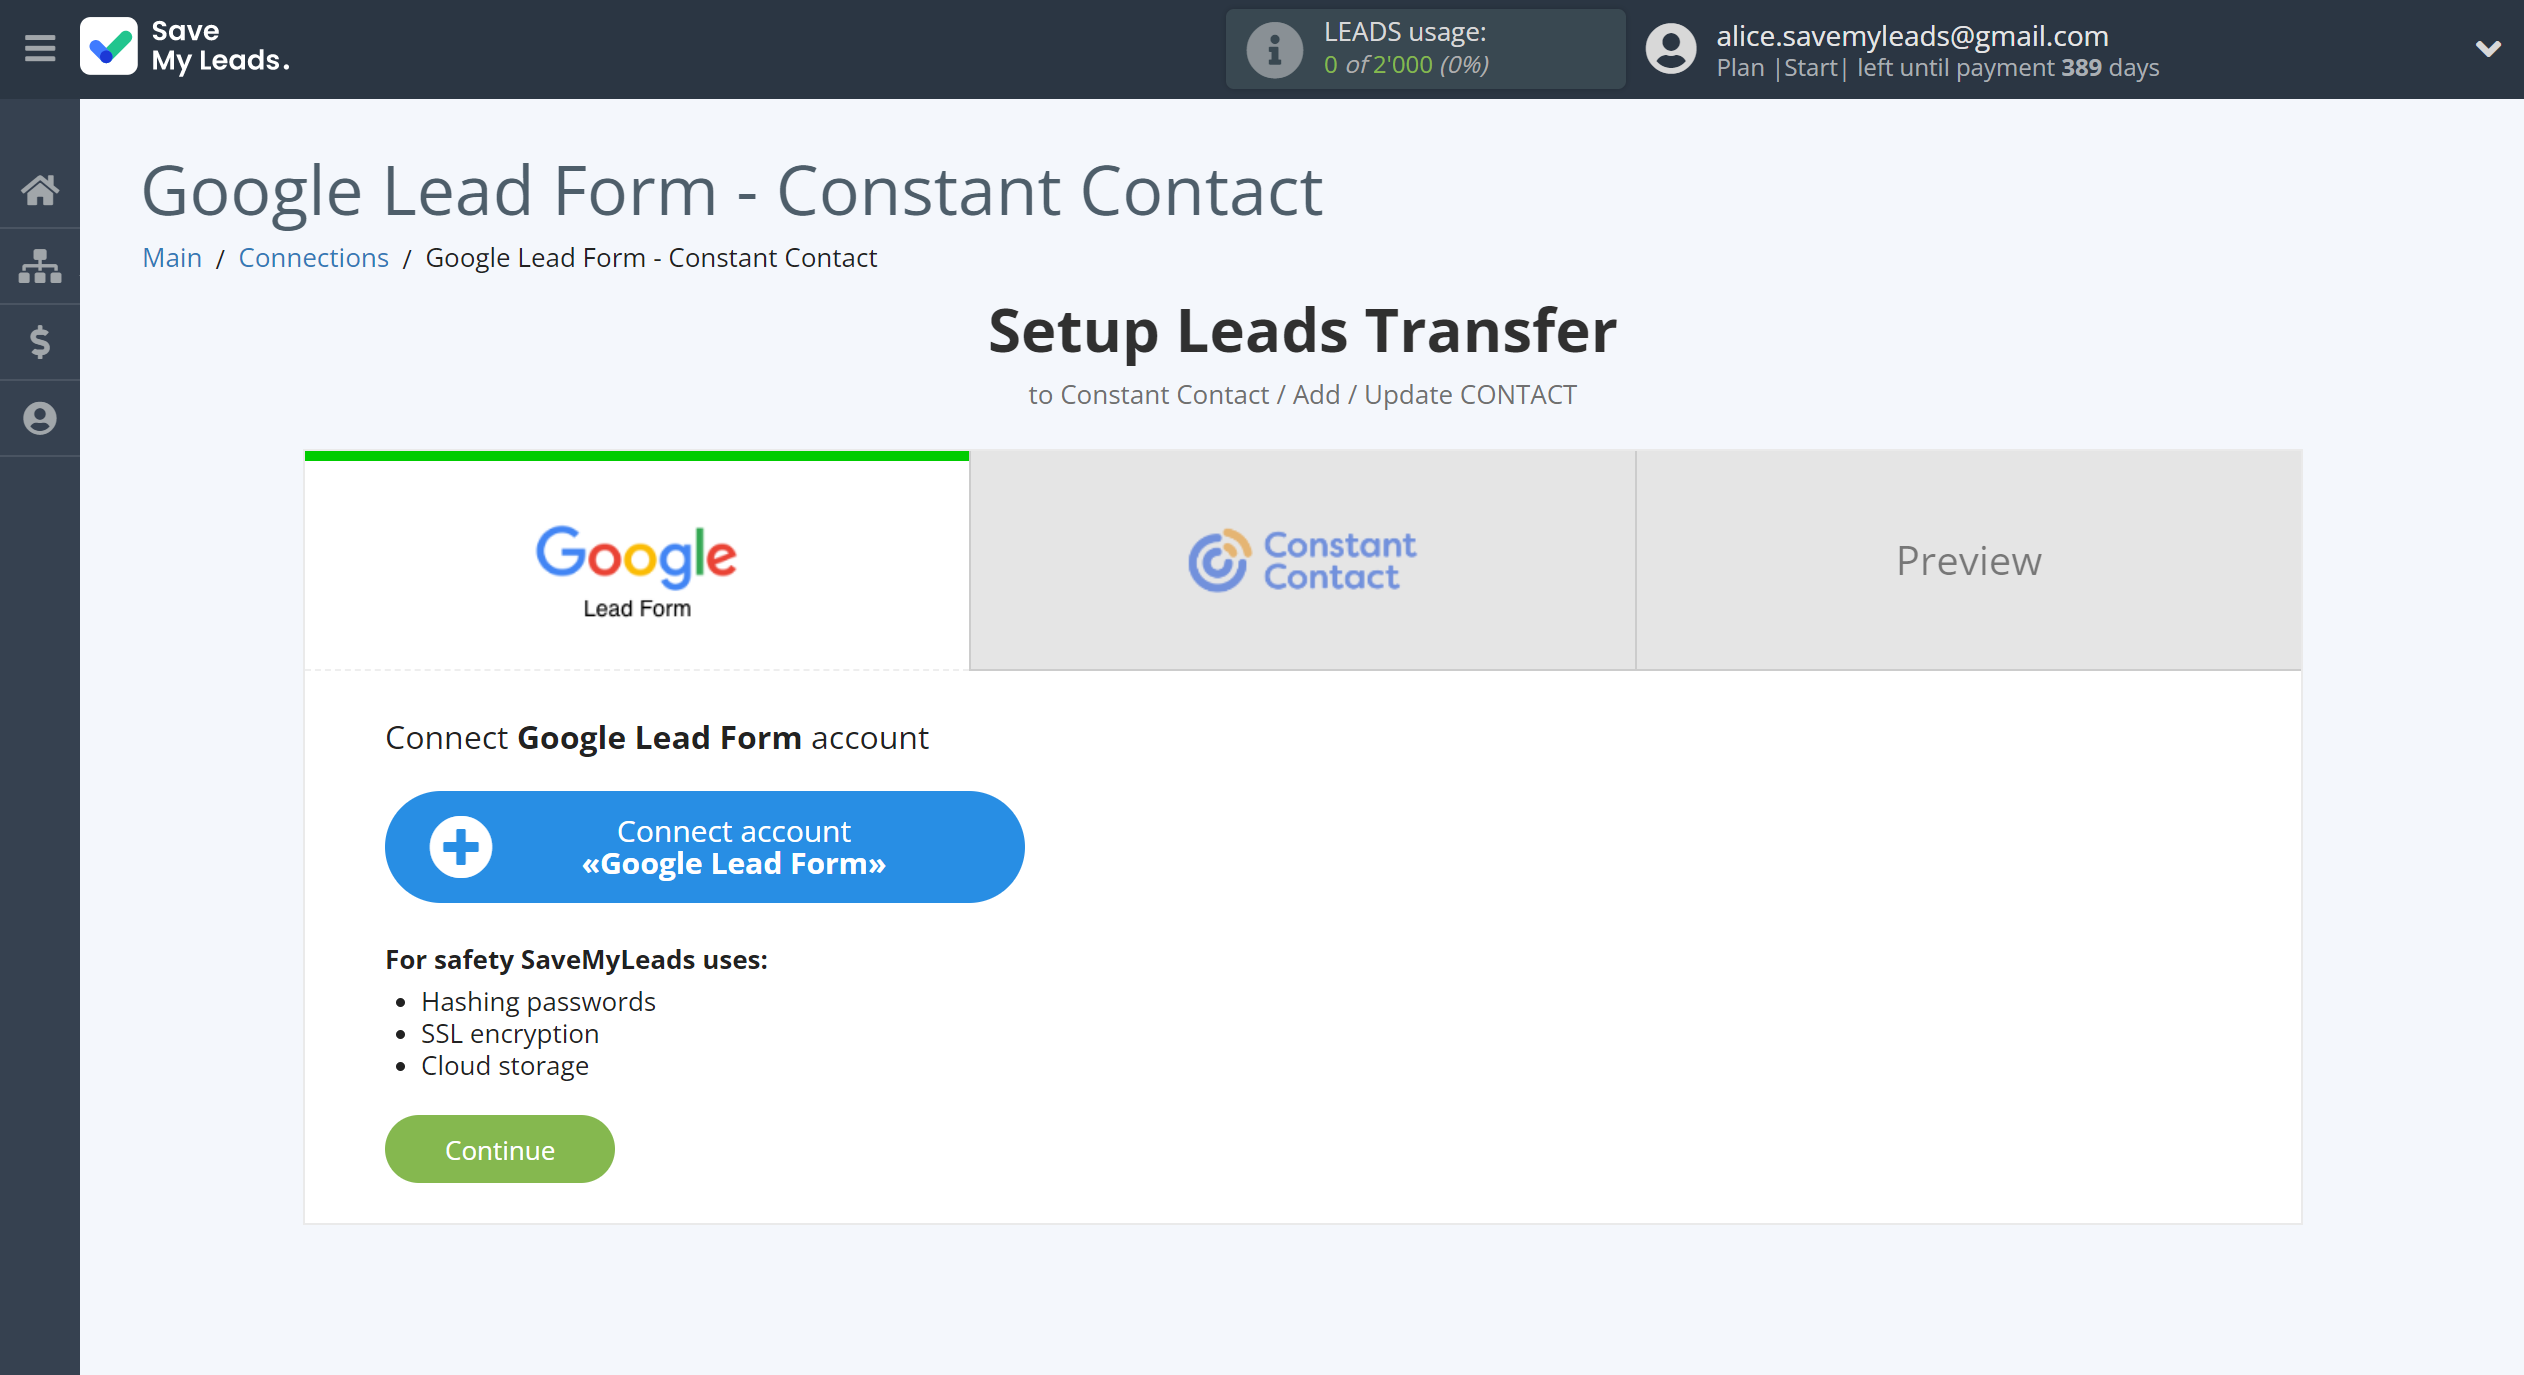 How to Connect Google Lead Form with Constant Contact | Data Source account connection